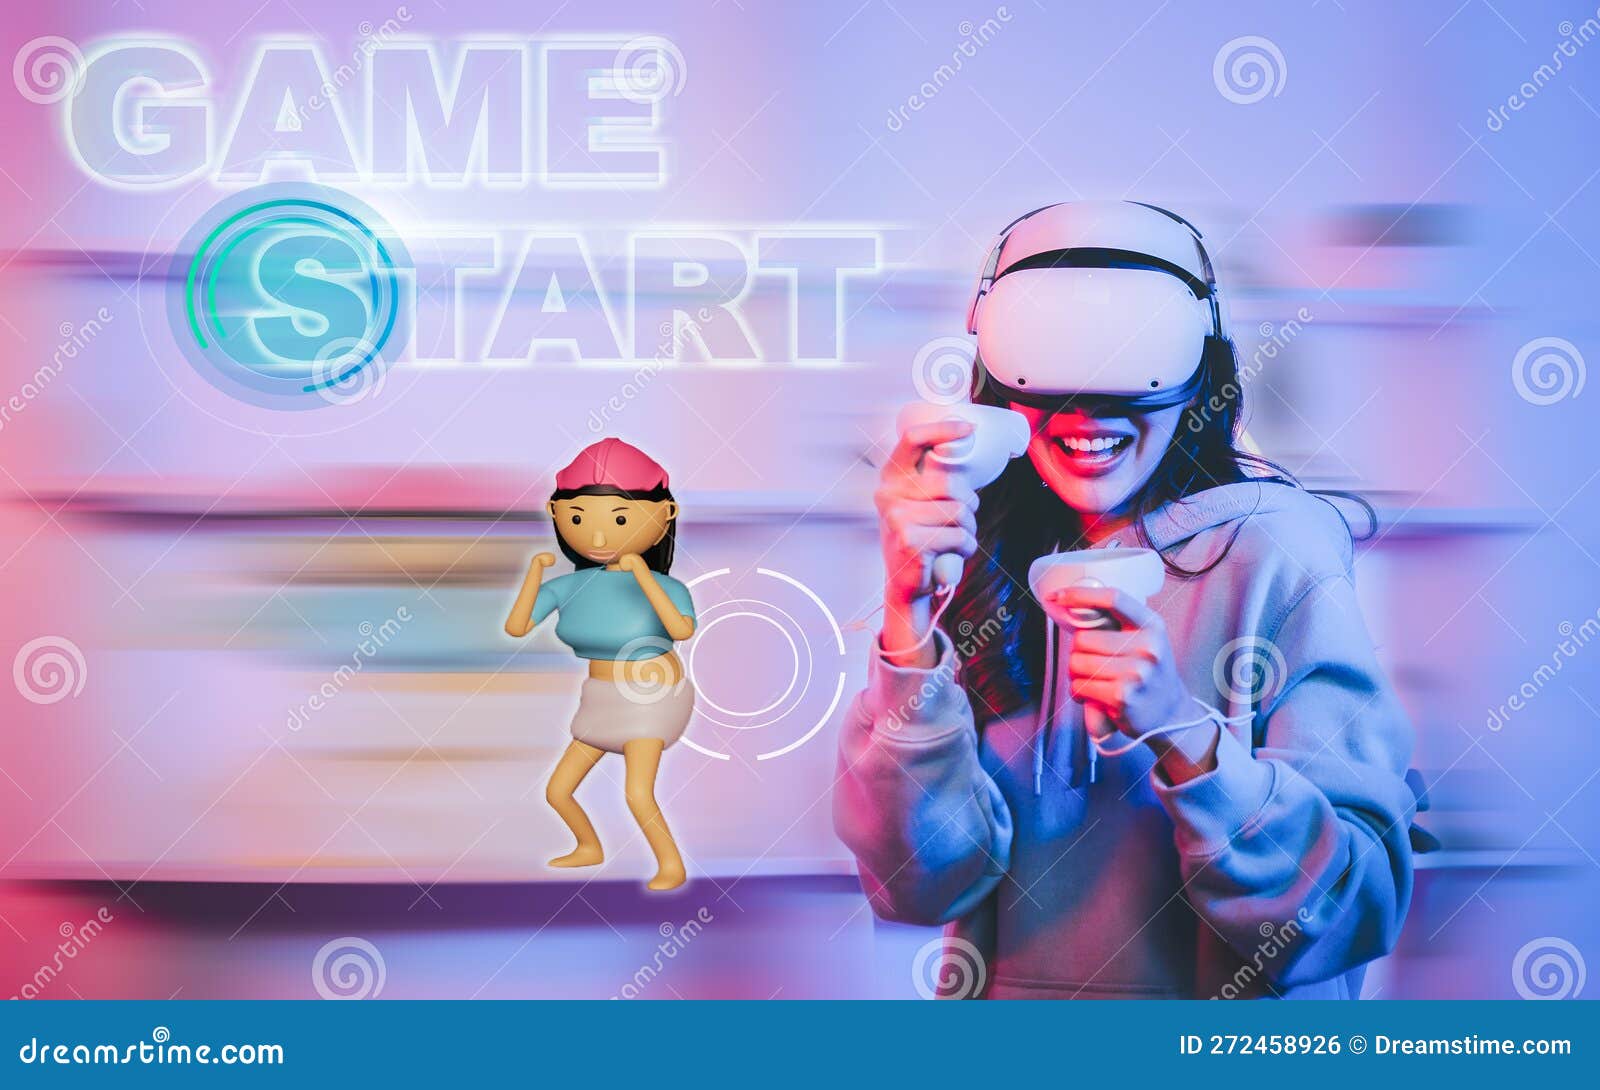 Play Together - Virtual World Online Game 